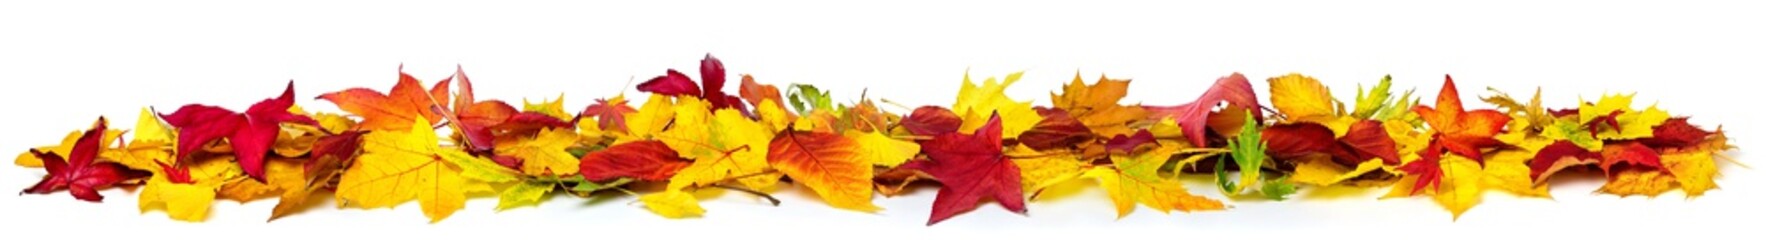 Colorful autumn leaves on the ground as a border, extra wide panorama format with vibrant colors, isolated on white